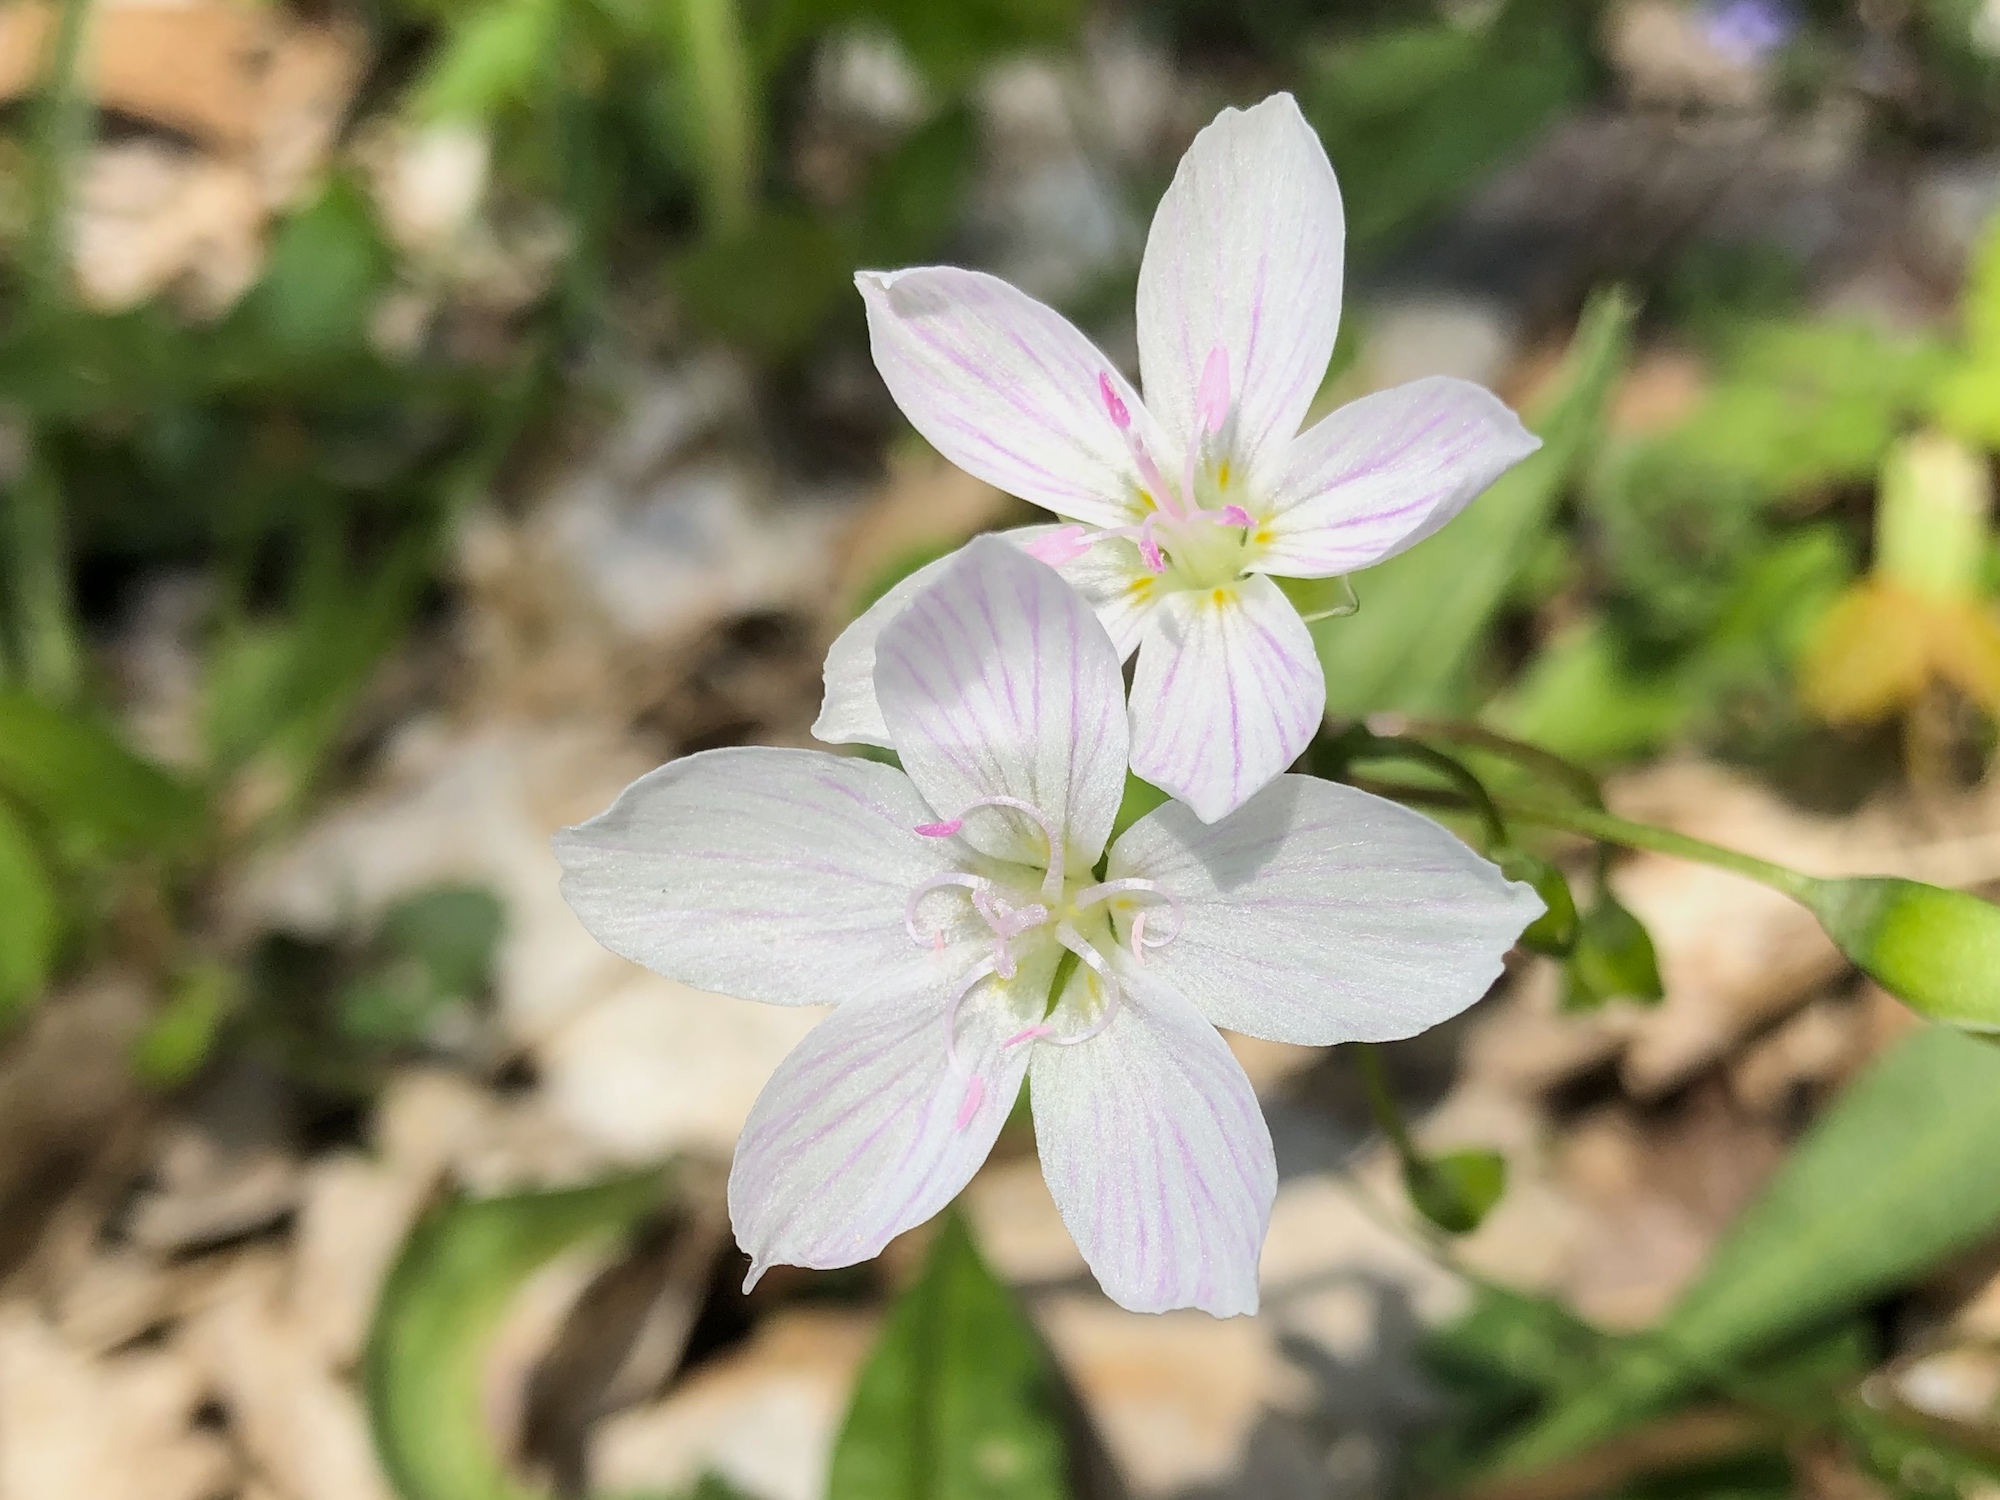 Springbeauty in the Maple-Basswood Forest of the University of Wisconsin Arboretum in Madison, Wisconsin on May 6, 2020.